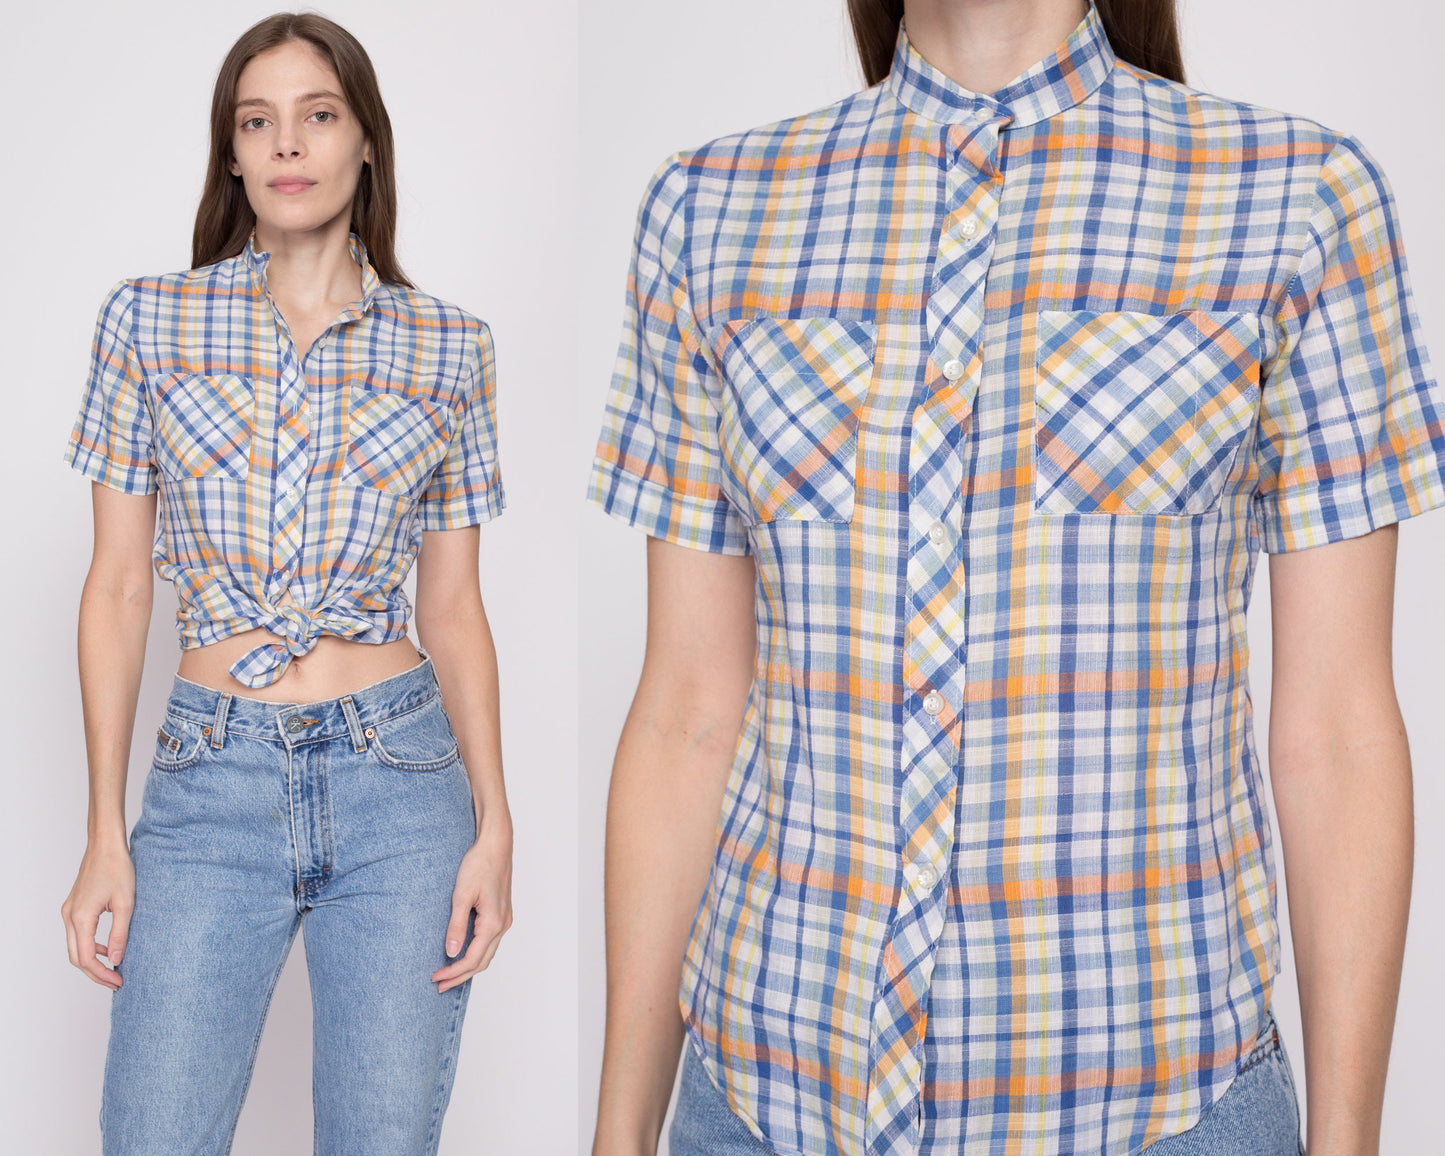 Small 70s Plaid Button Up Top | Retro Vintage Short Sleeve Chest Pocket Shirt